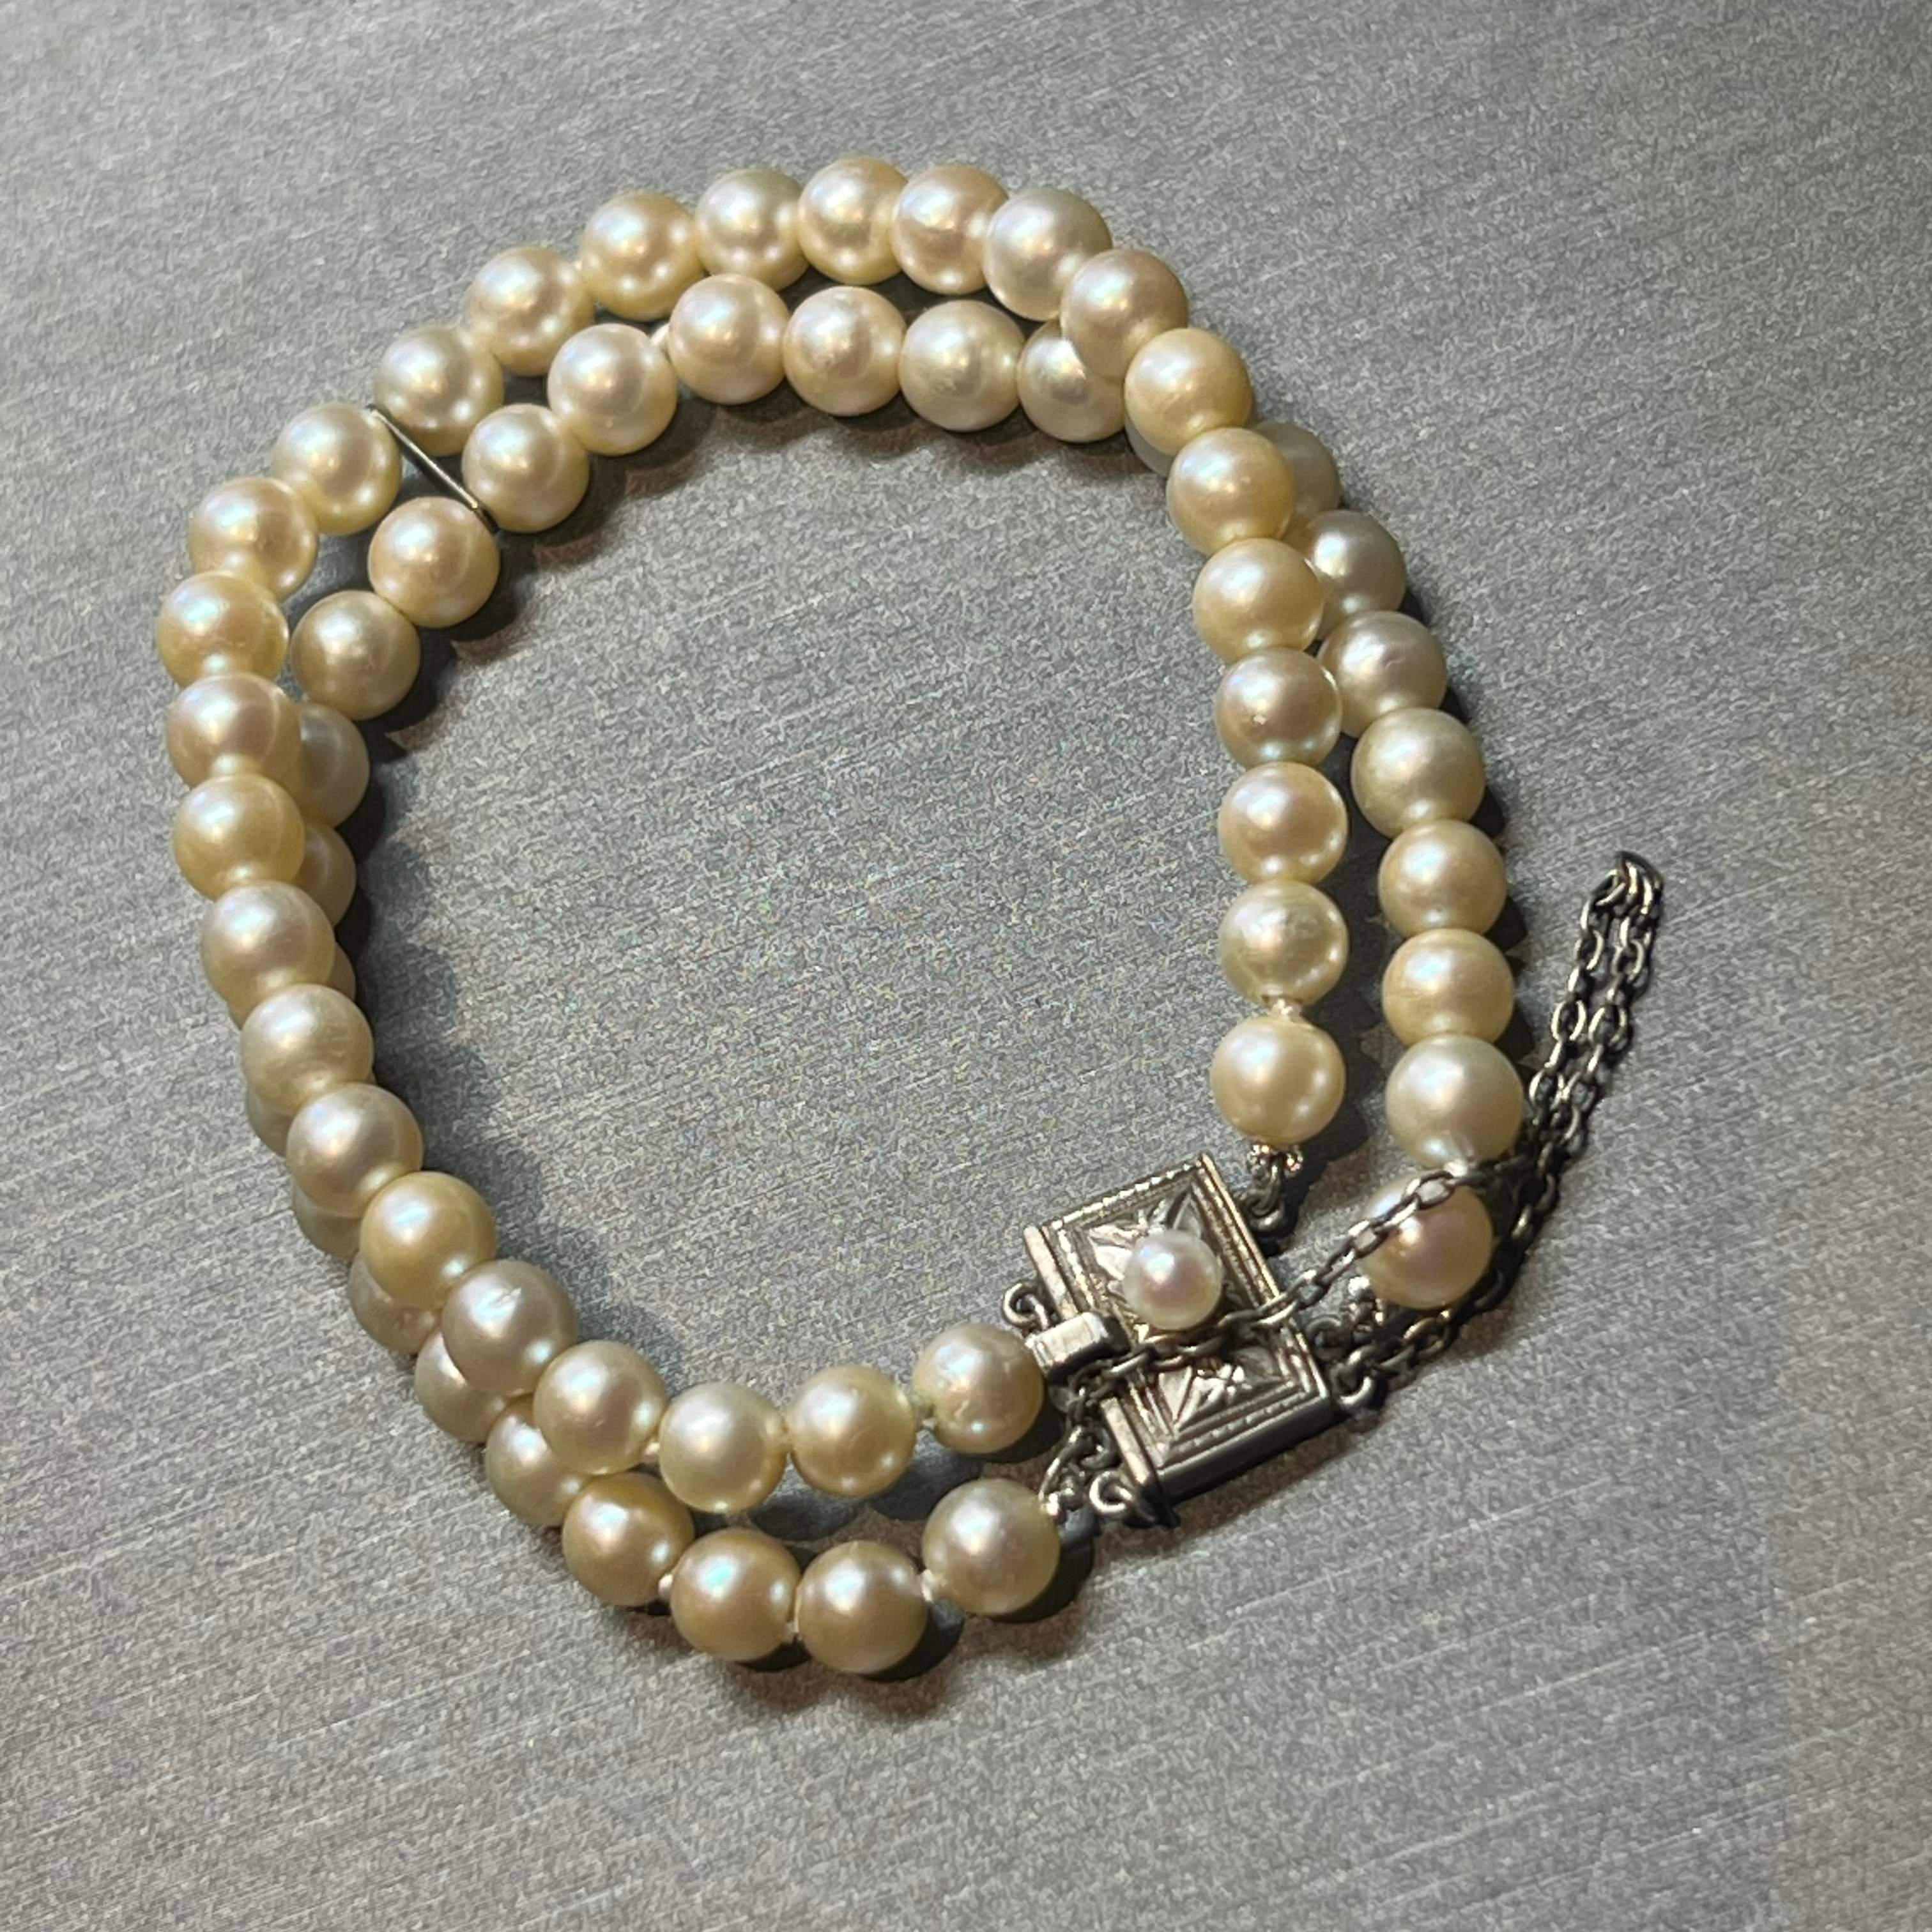 Authentic Mikimoto Estate Akoya Pearl Bracelet 6.5 Silver 5.50-6.00 mm M361

Please look at the video attached for this item.
With the video, you can see the movement of the item at all angles and appreciate the details better.

This elegant